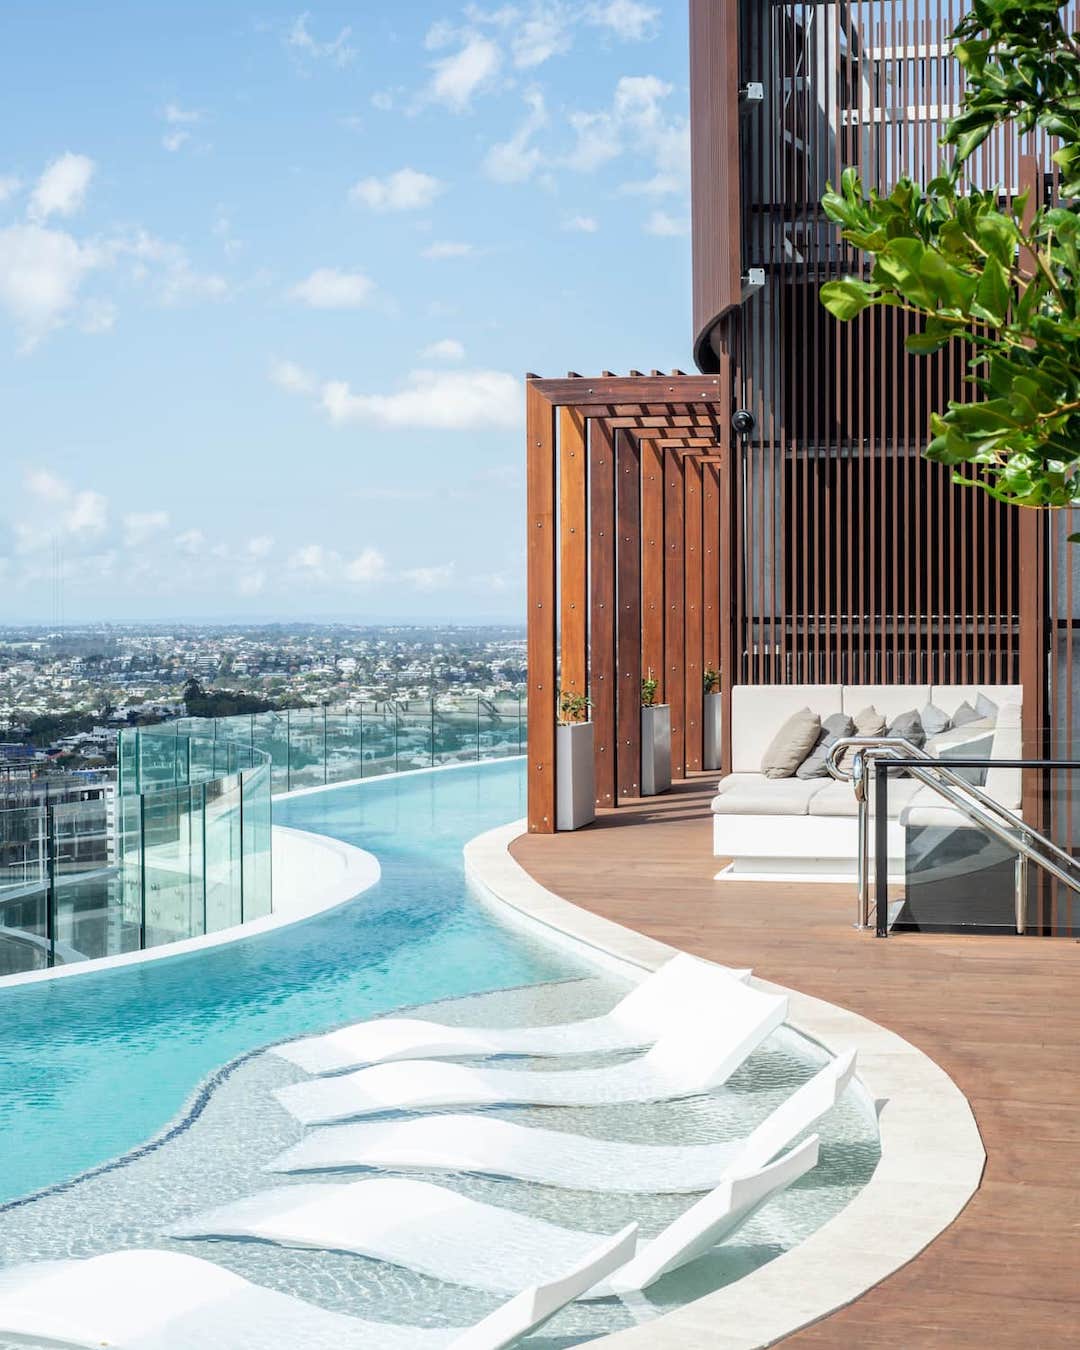 A sparkling rooftop pool with sun lounges under a clear sky.